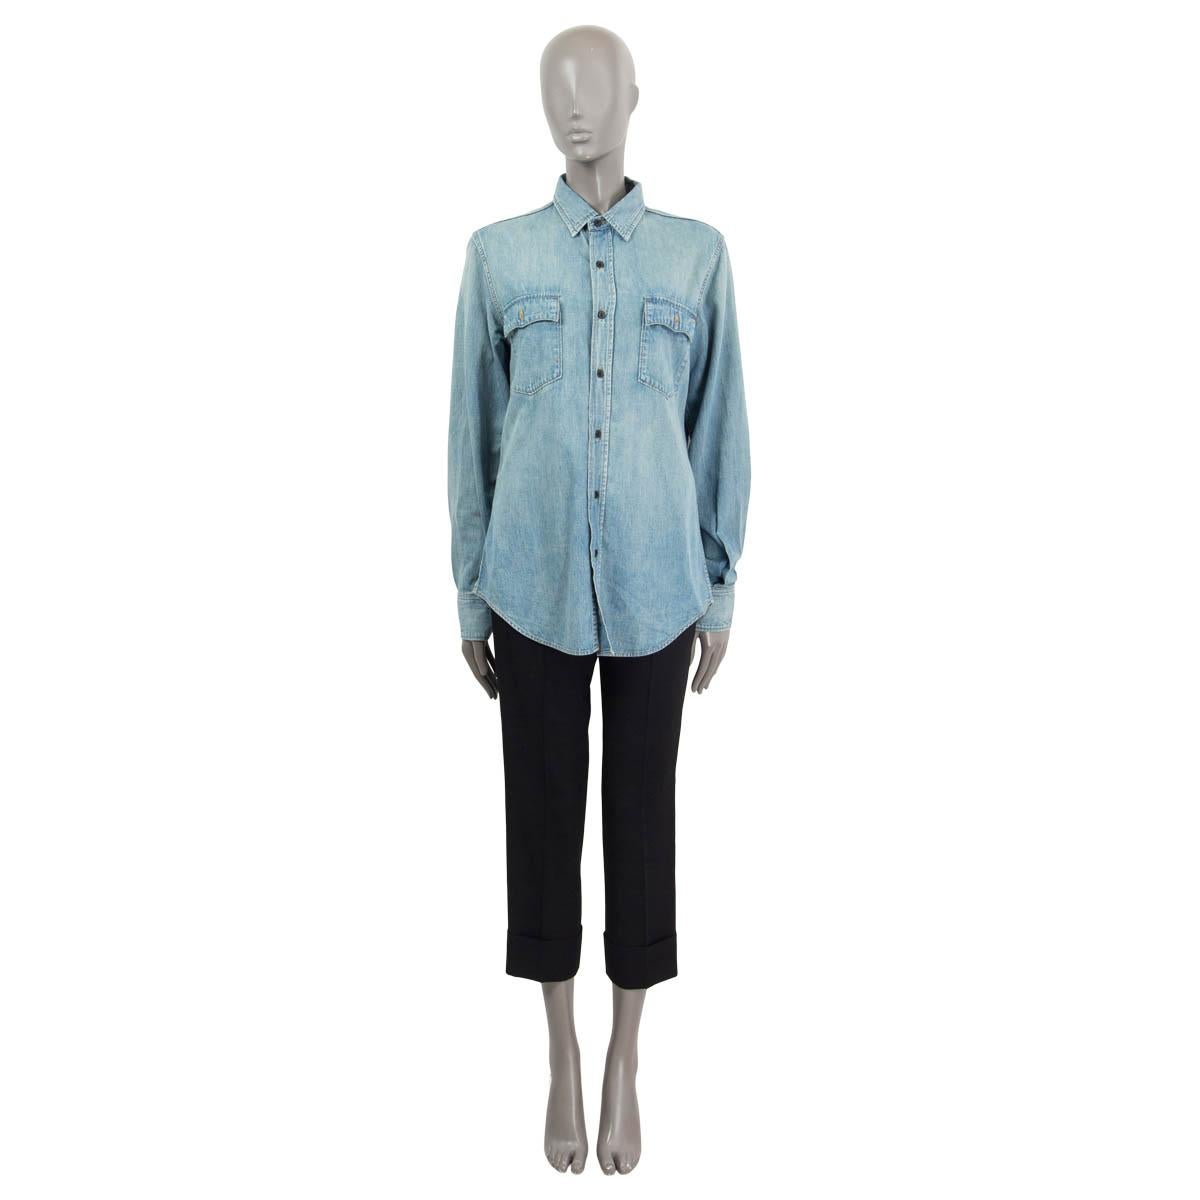 100% authentic Saint Laurent Button button-up shirt in blue cotton (100%) with a flat collar. Features two patch pockets on the front. Has buttoned cuffs. Closes with black buttons. Unlined. Has been worn and is in excellent